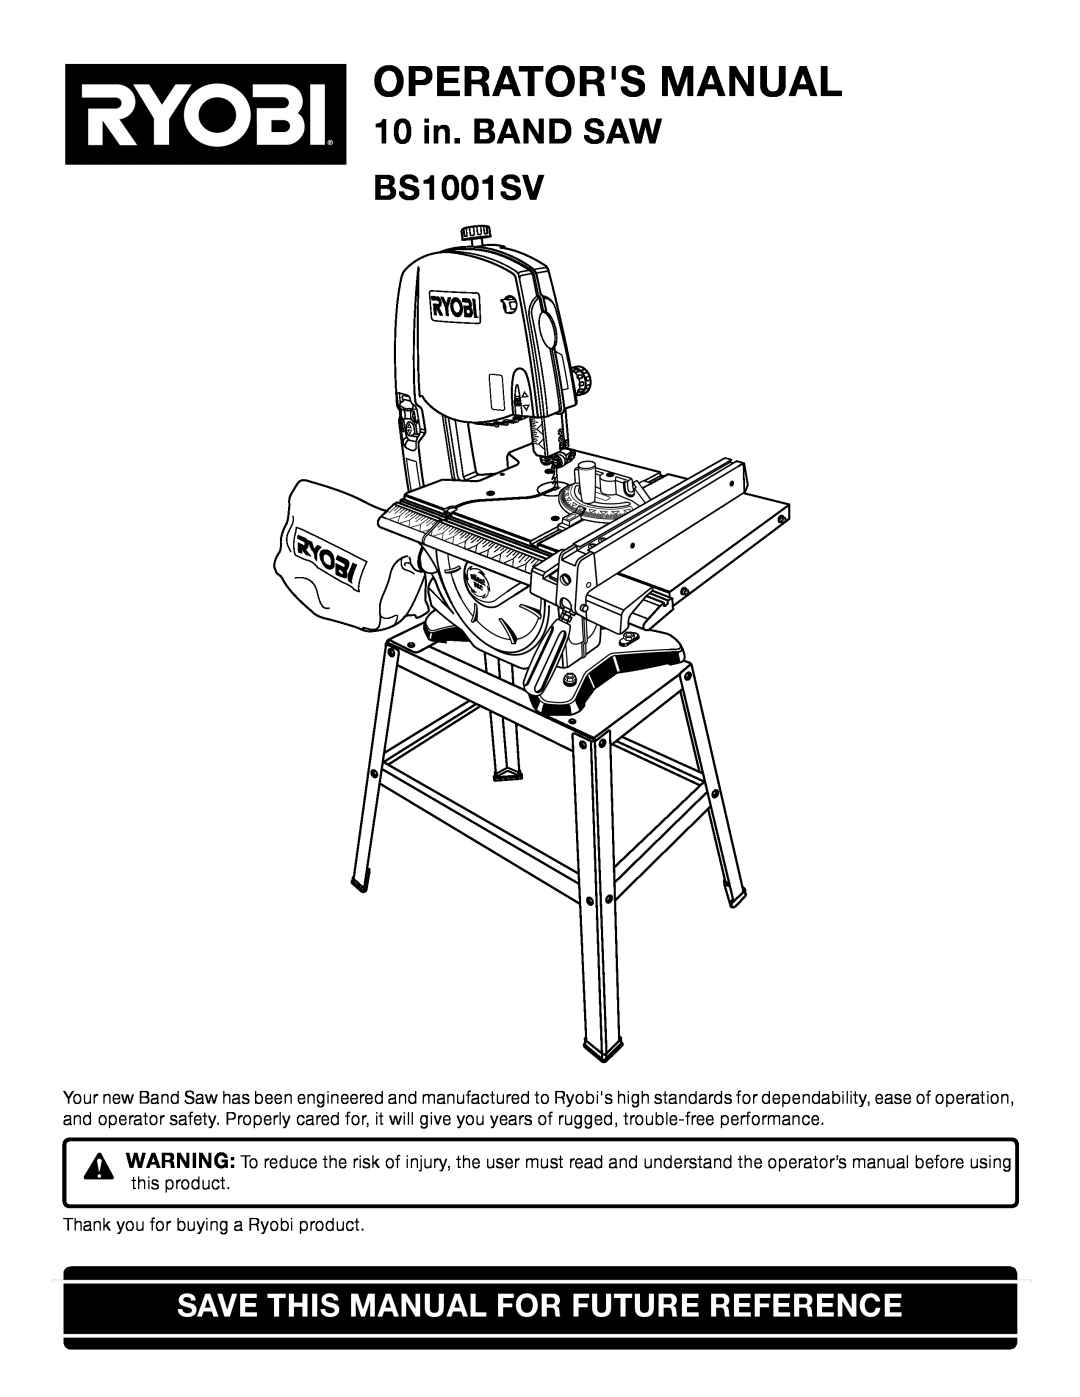 Ryobi manual Operators Manual, 10 in. BAND SAW BS1001SV, Save This Manual For Future Reference 